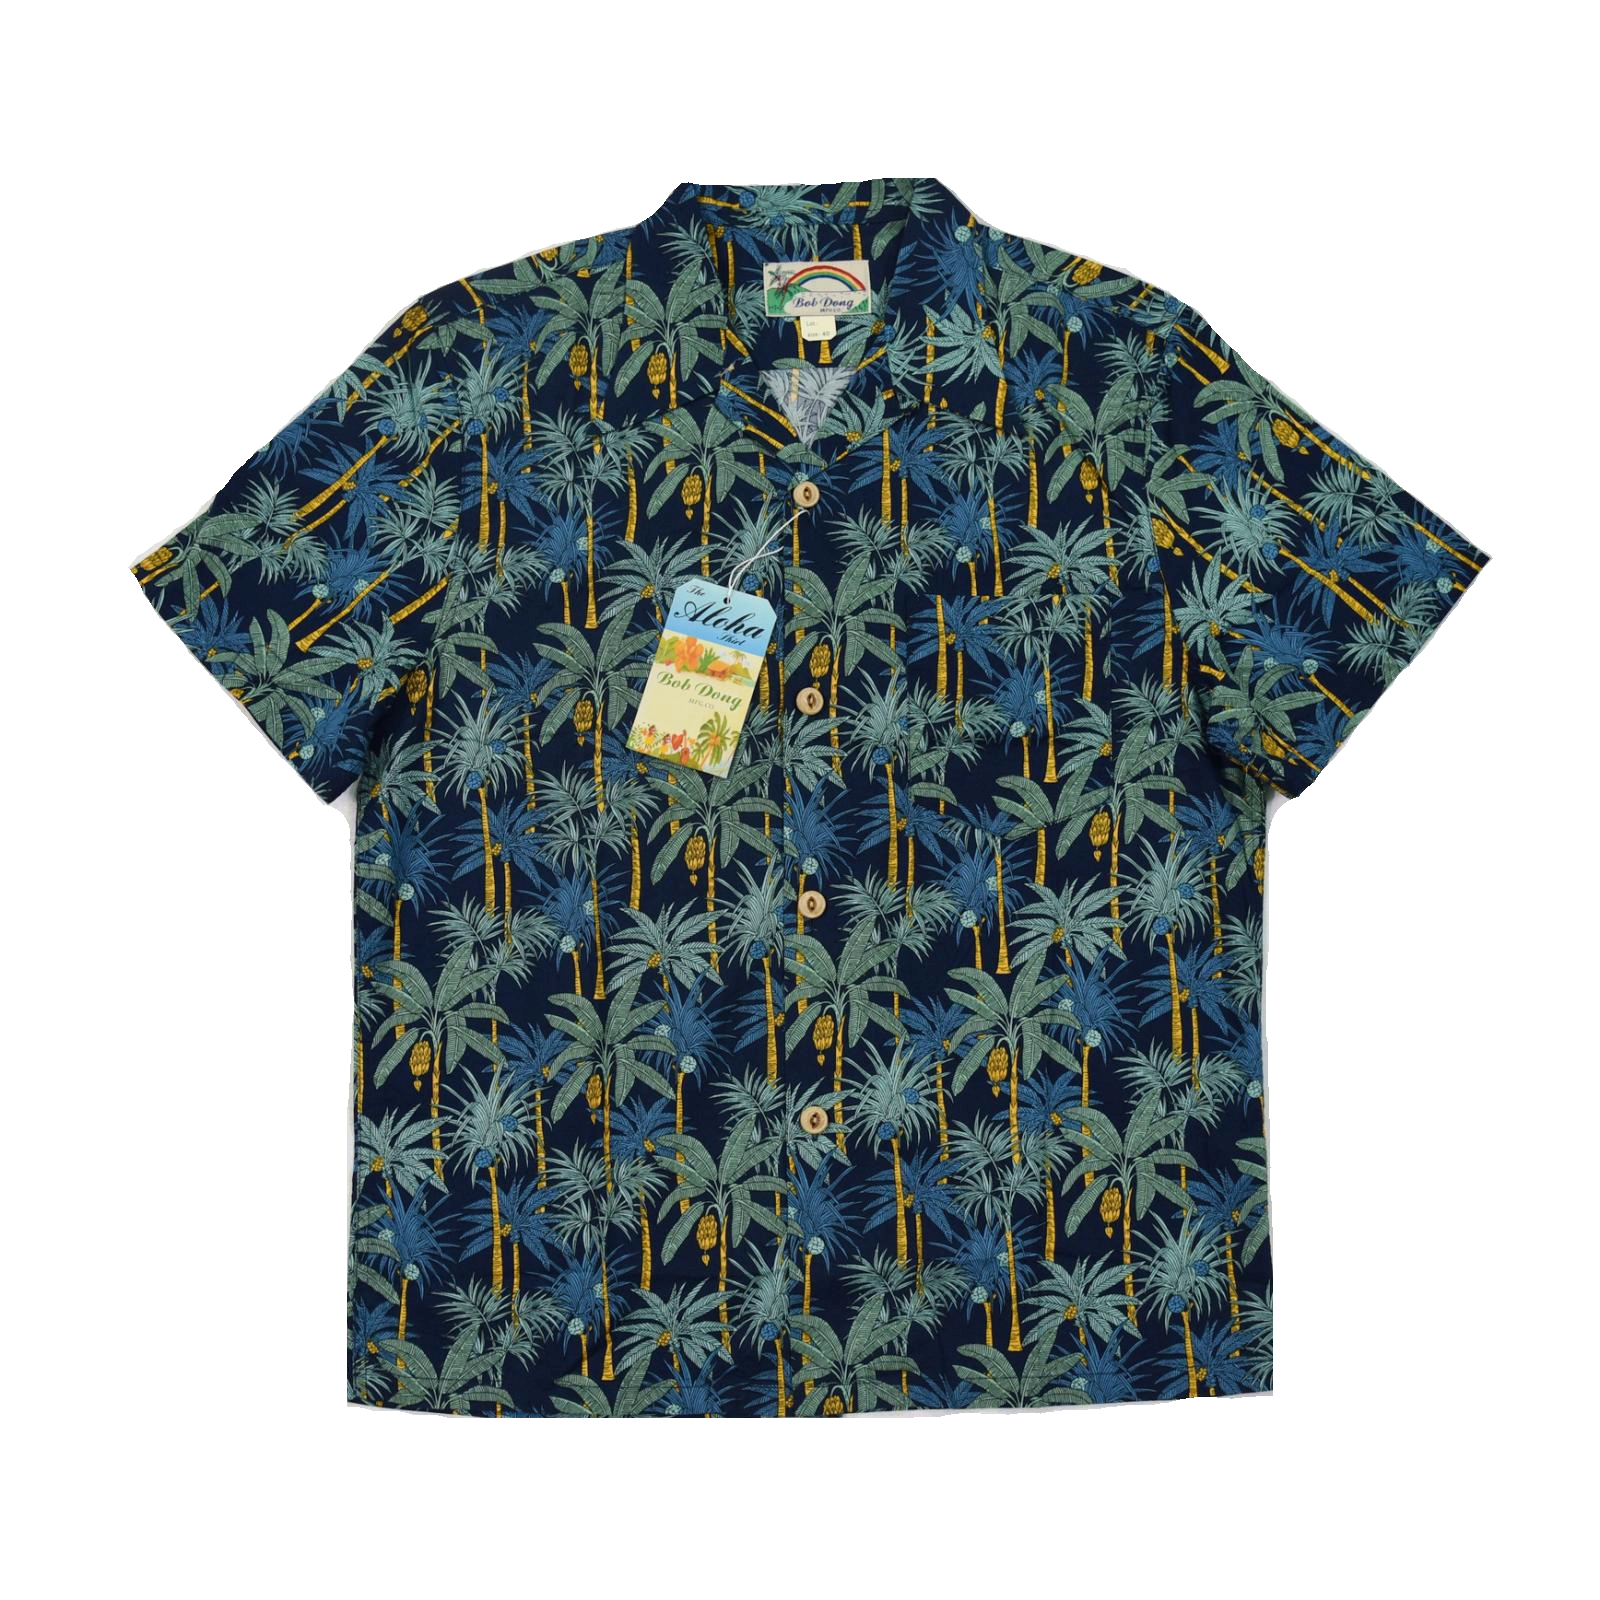 Navy BlueBOB DONG New products 2617 Botany flowers and plants Banana woods ALOHAHAWAII leisure time Short sleeve shirt male